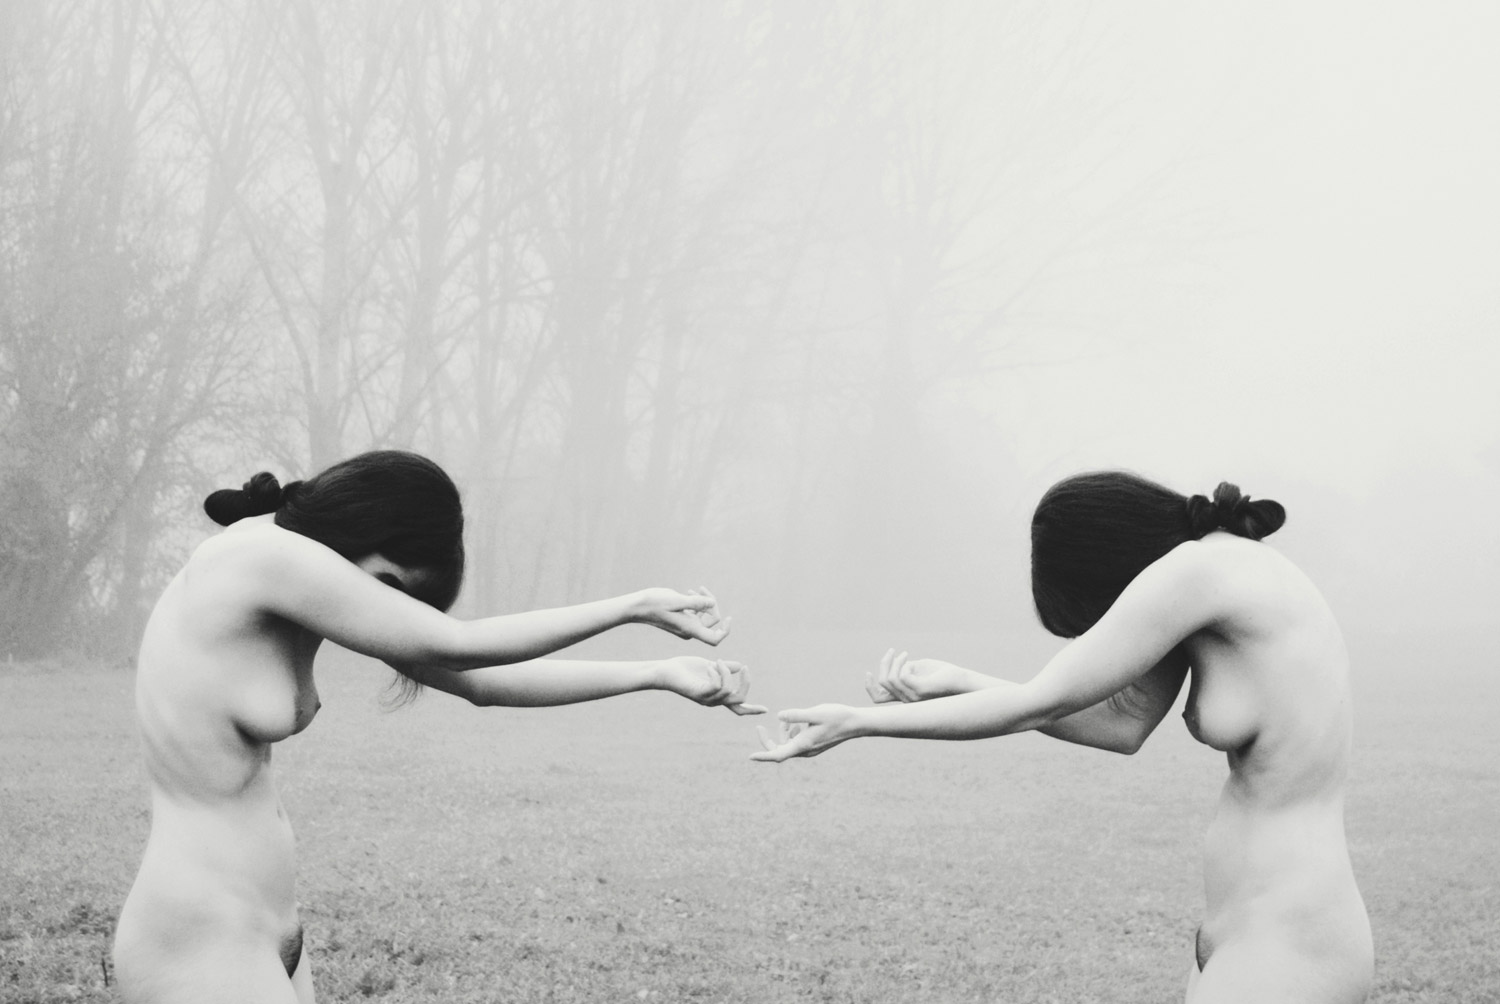 Dara Scully - two women reaching for each other